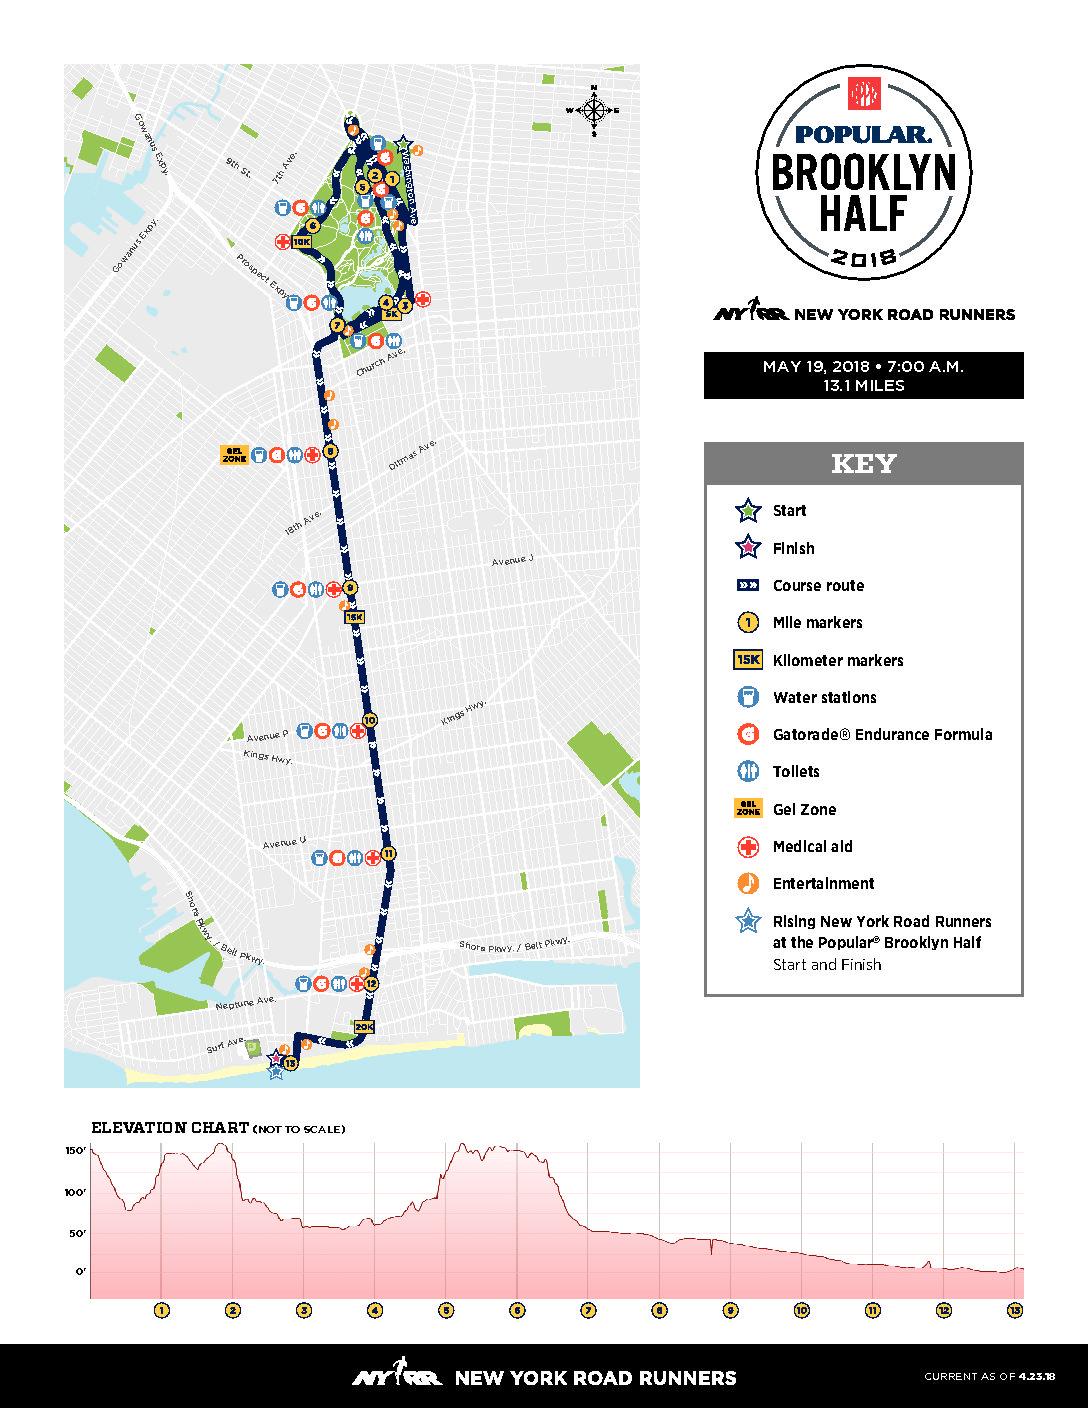 NYRR Just opened up registration for a bunch of races. 5th ave mile